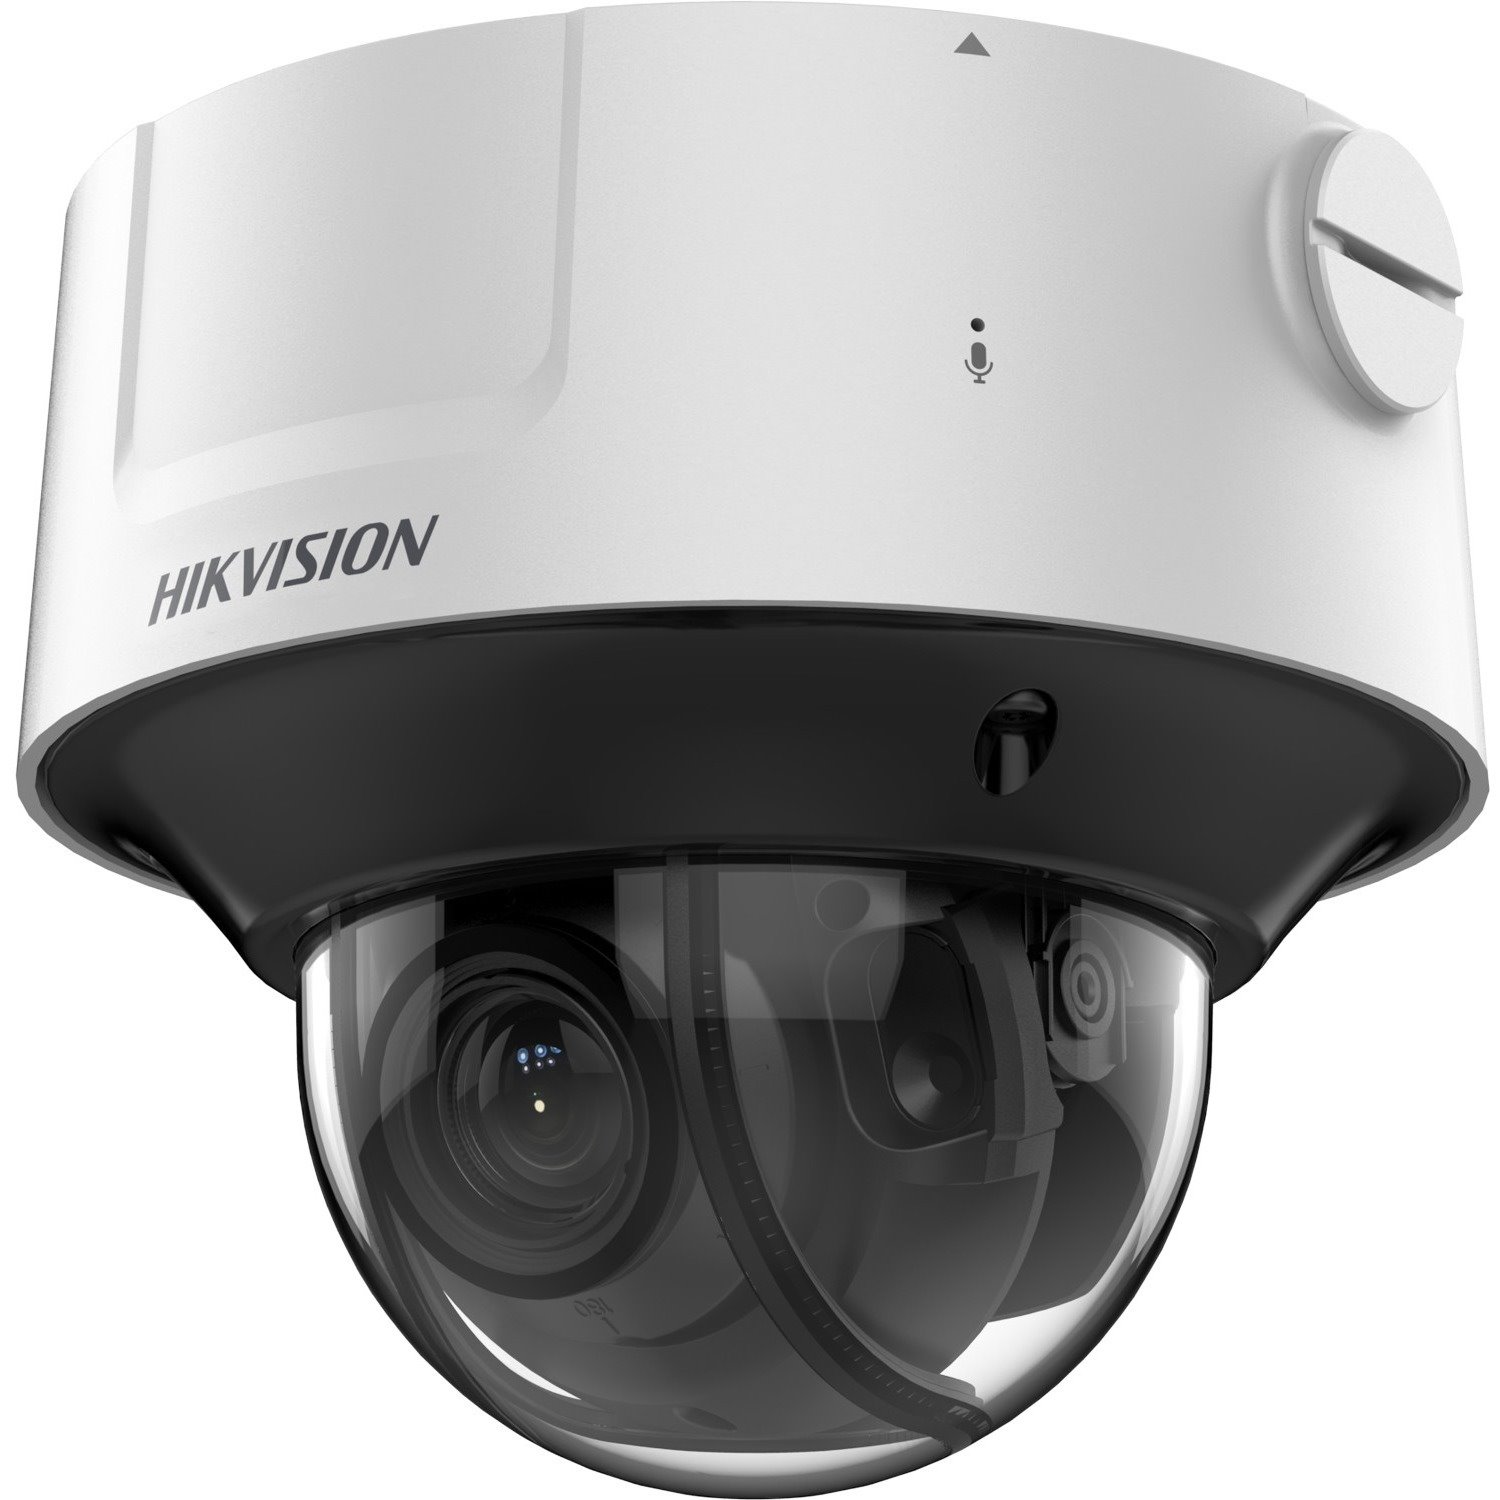 Hikvision DeepinView IDS-2CD7546G0-IZHSY 4 Megapixel Outdoor HD Network Camera - Color - Dome